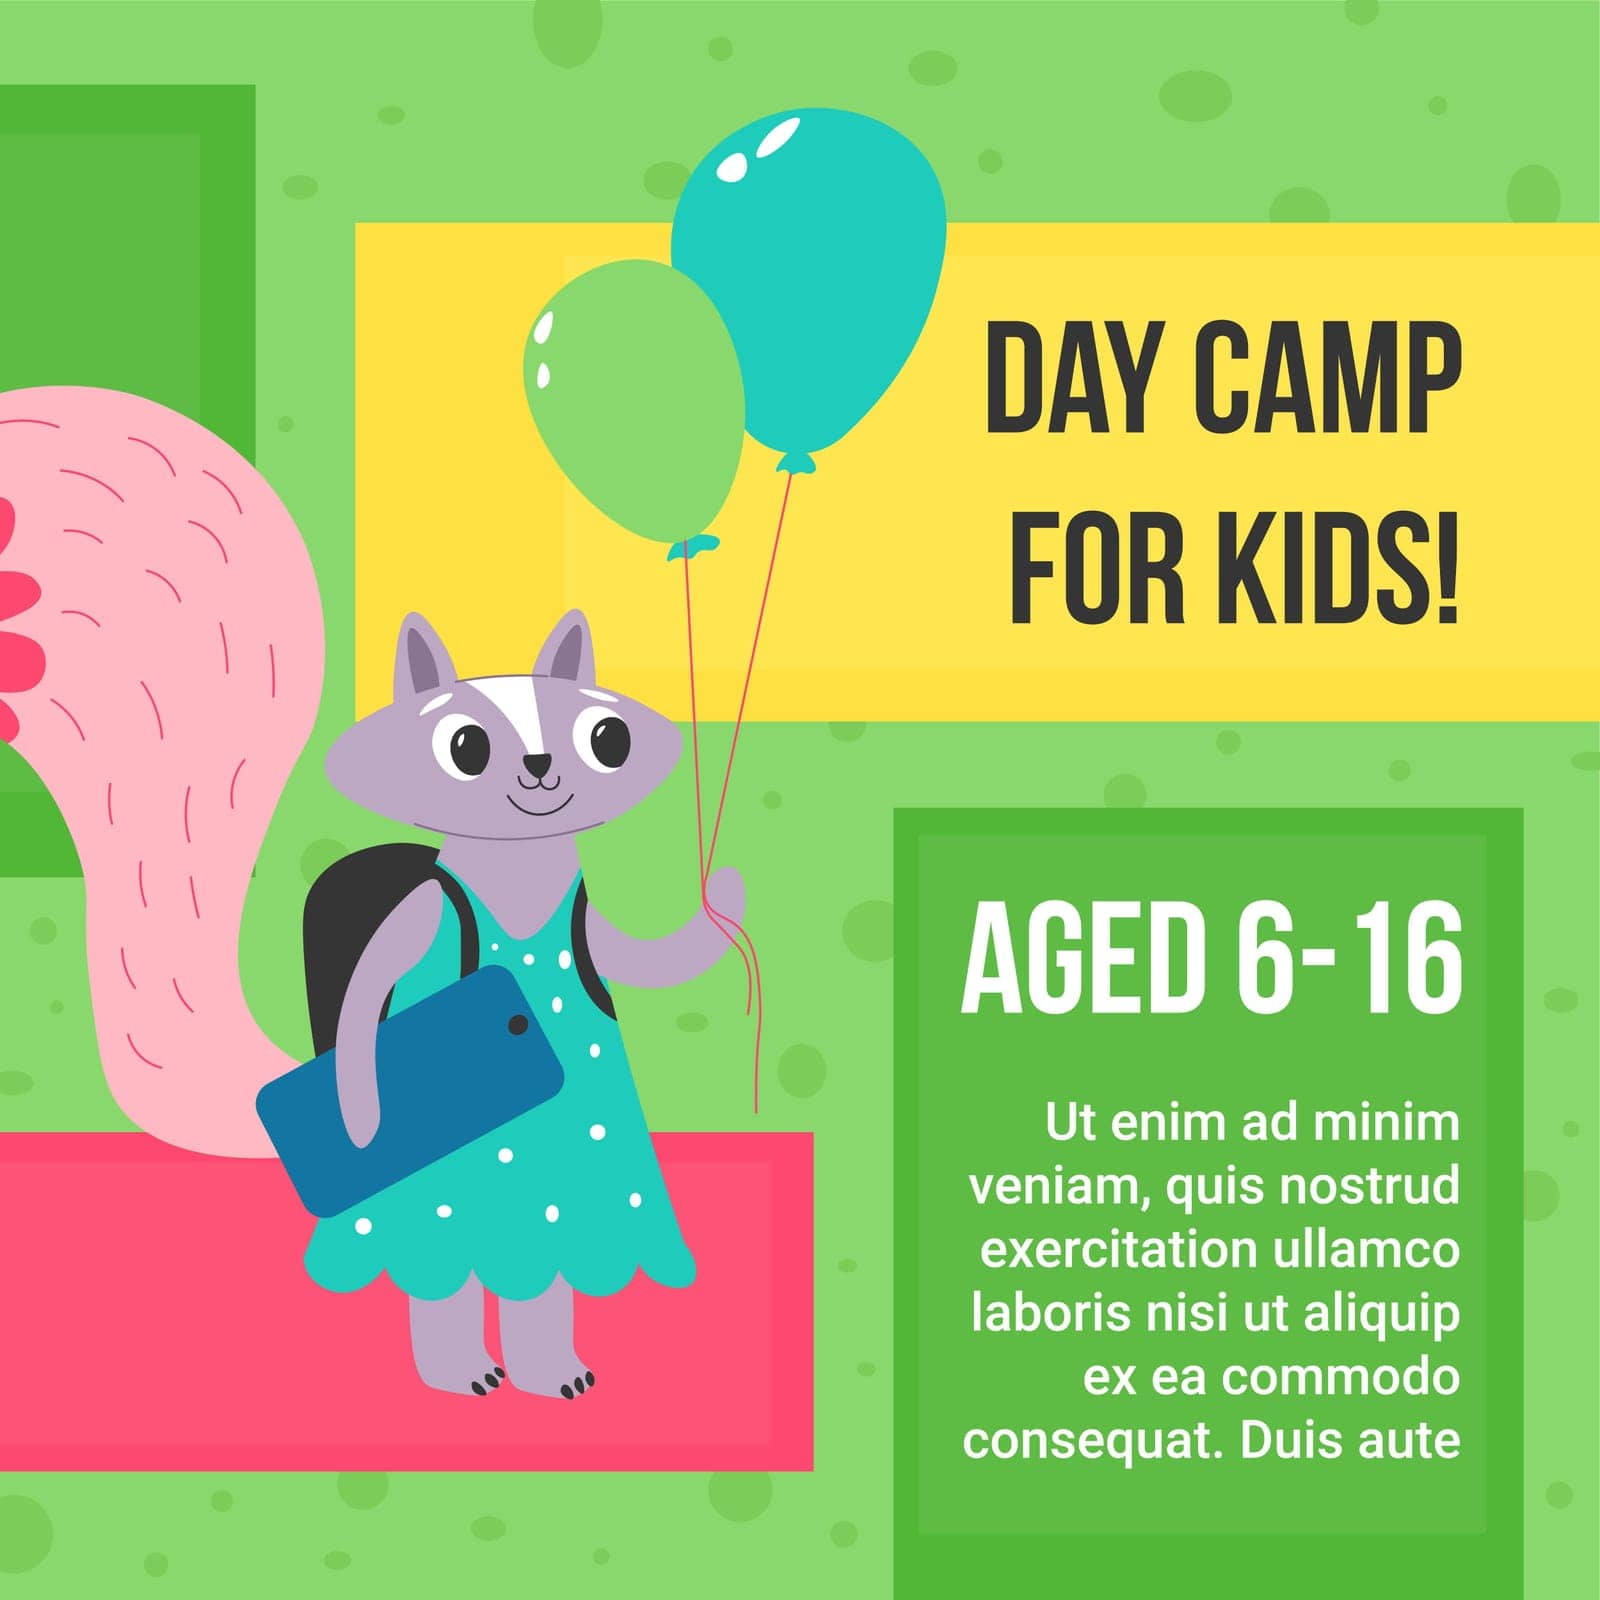 Camp for kids age 6 to 16, preschool and teenagers activities and recreations. Adventures for children, promotional banner with information for parents. Summer rest and fun. Vector in flat style